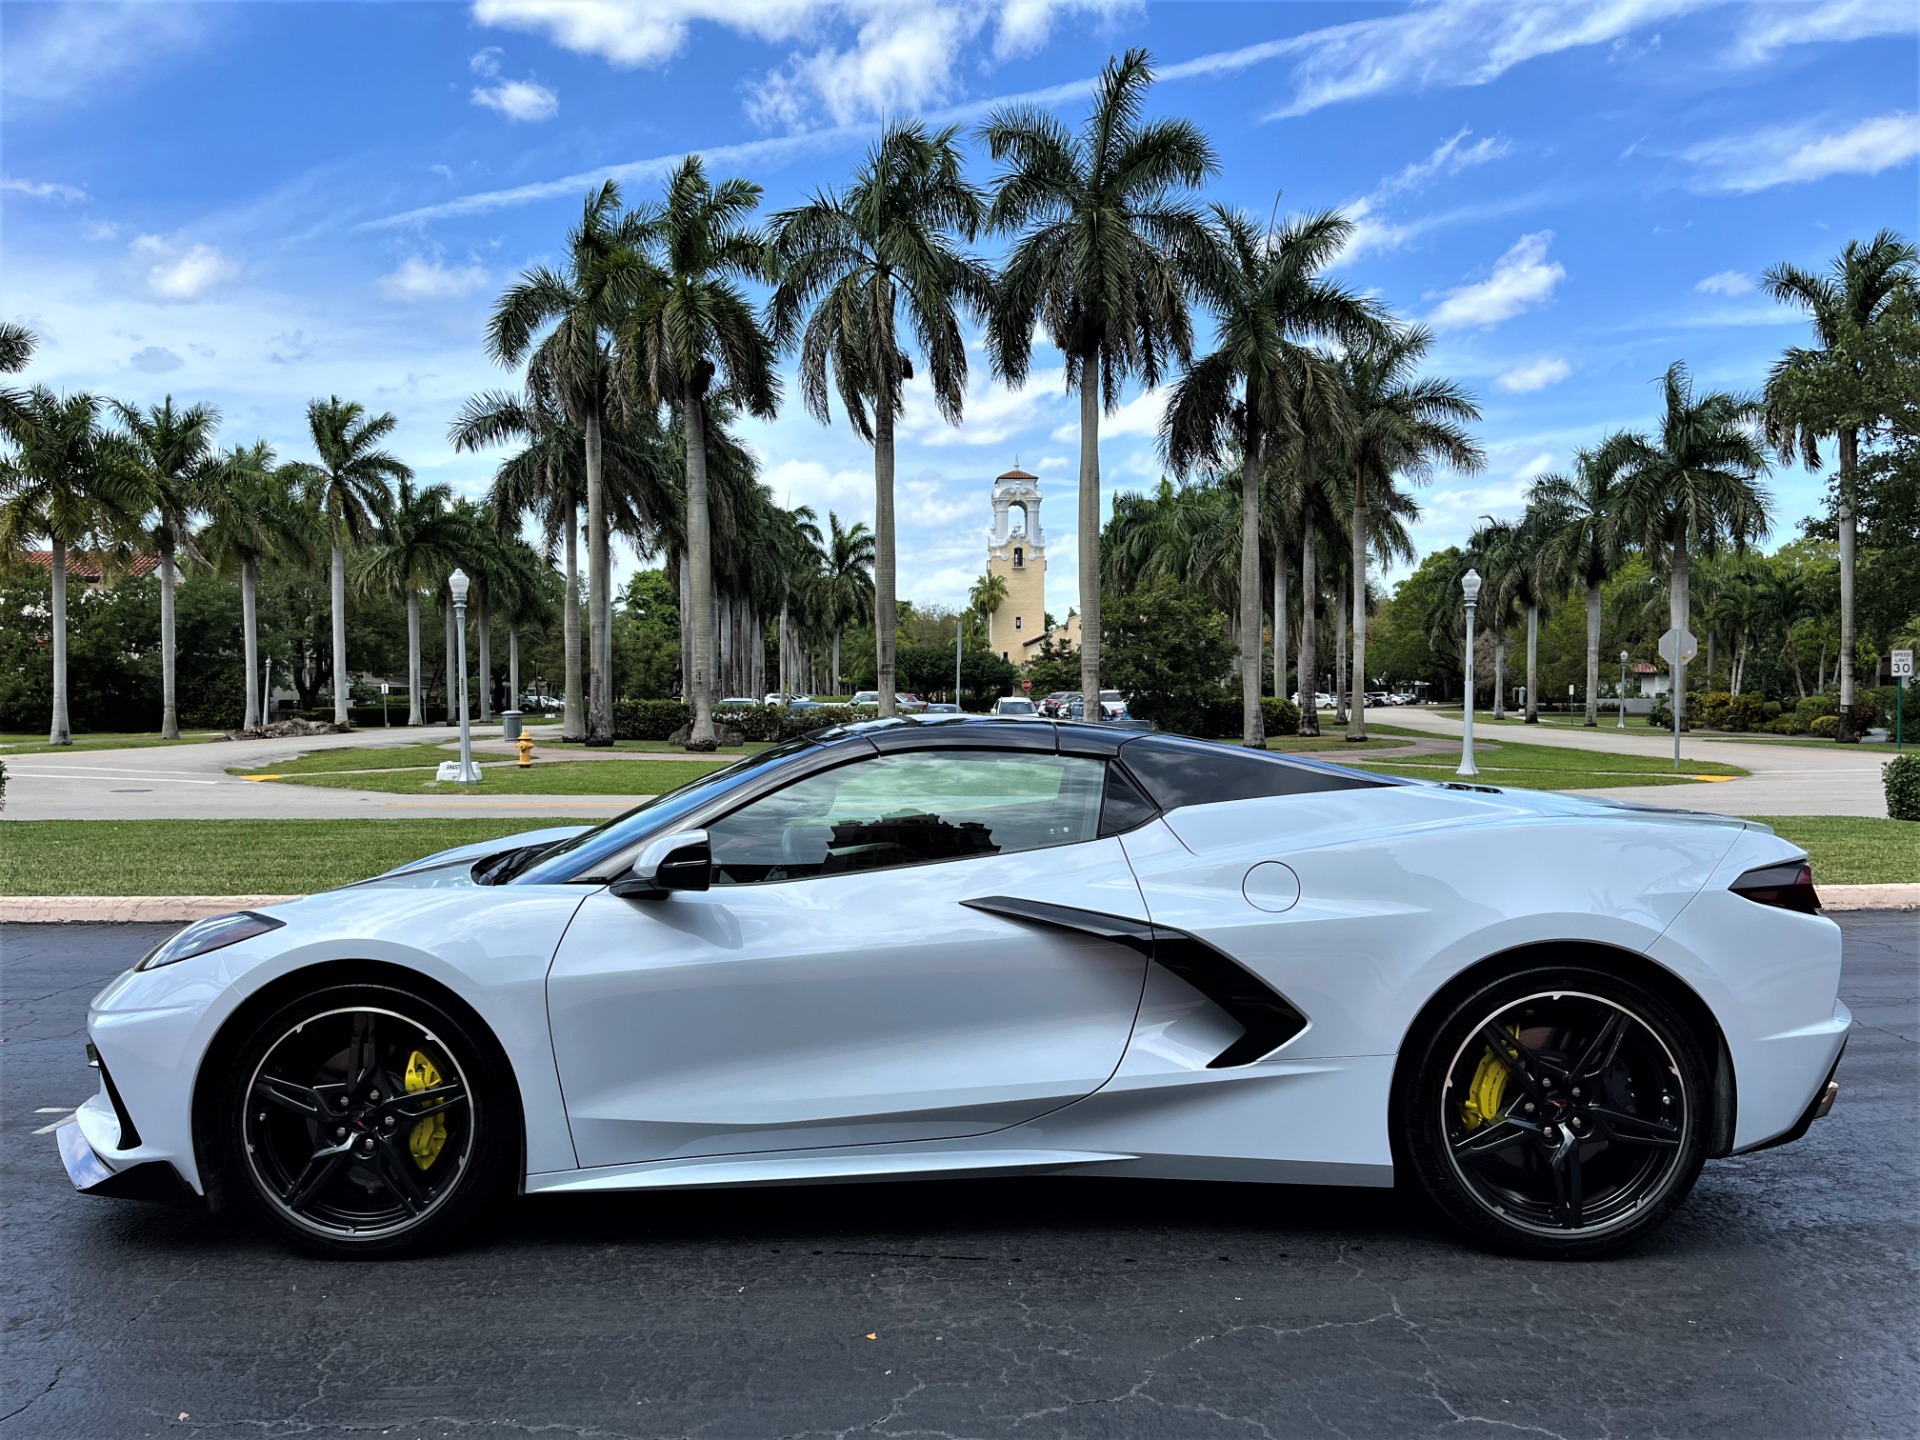 Used 2020 Chevrolet Corvette Stingray LT3 for sale Sold at The Gables Sports Cars in Miami FL 33146 4